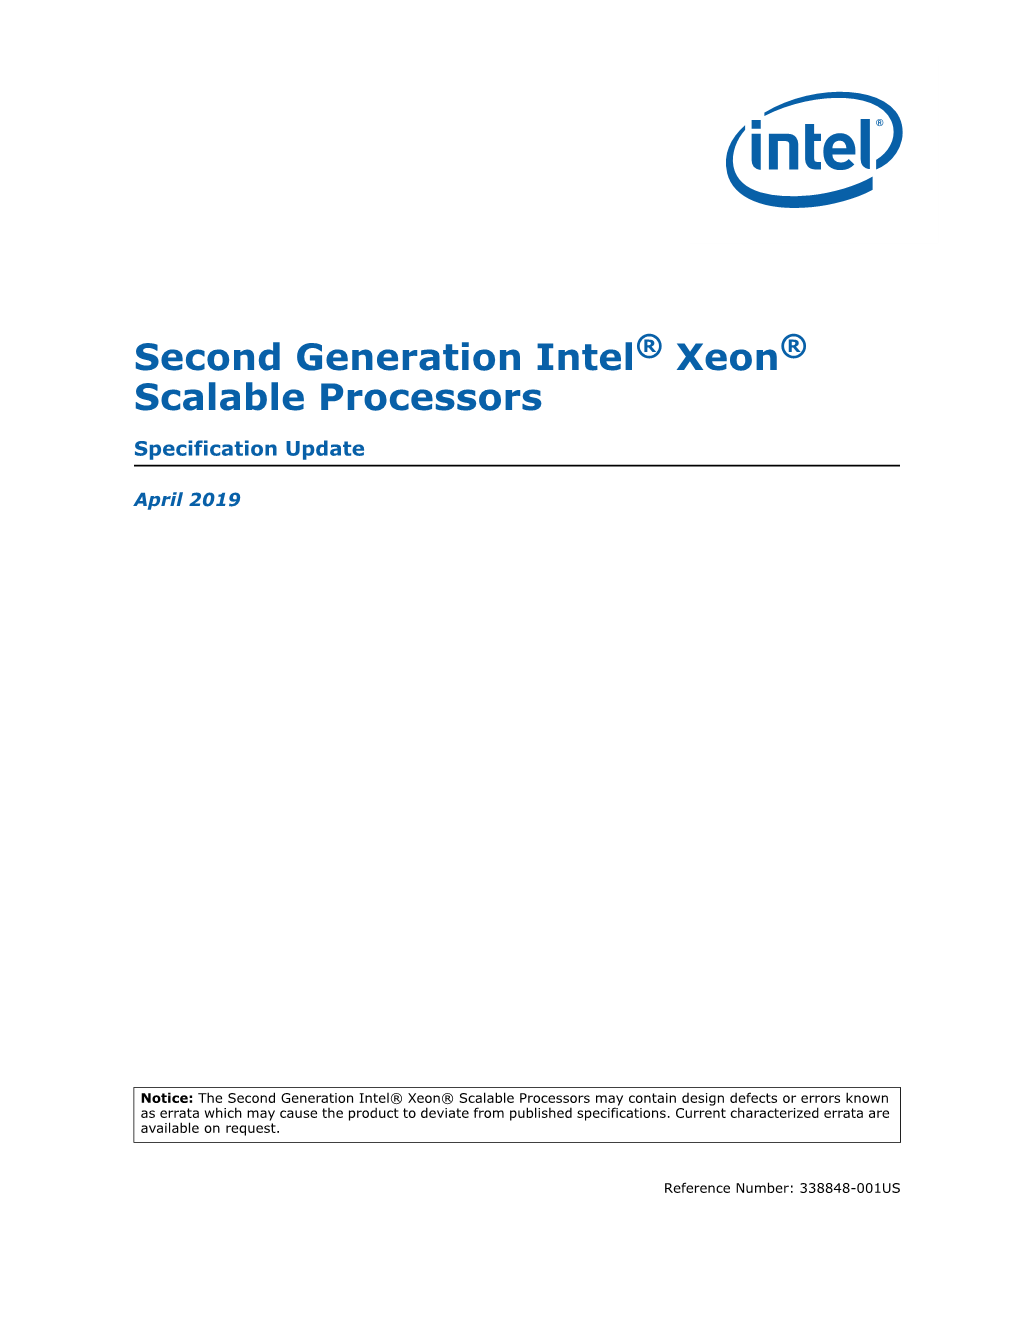 Second Generation Intel® Xeon® Scalable Processors